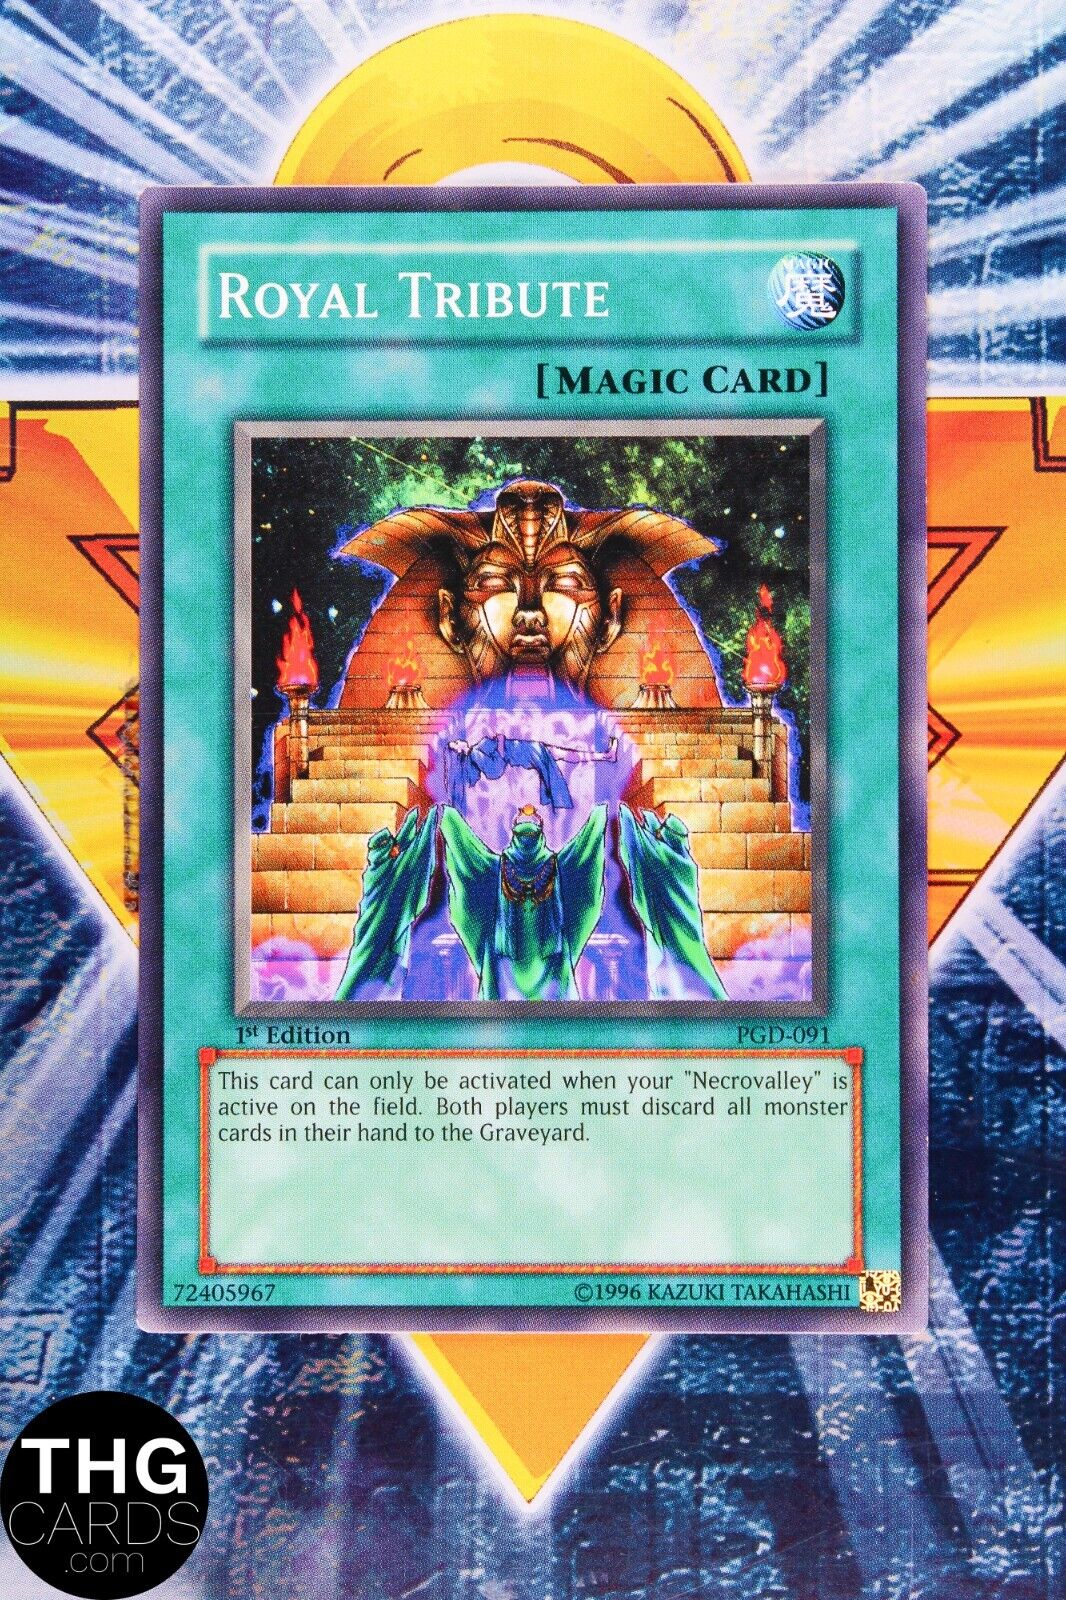 Royal Tribute PGD-091 1st Edition Common Yugioh Card 2